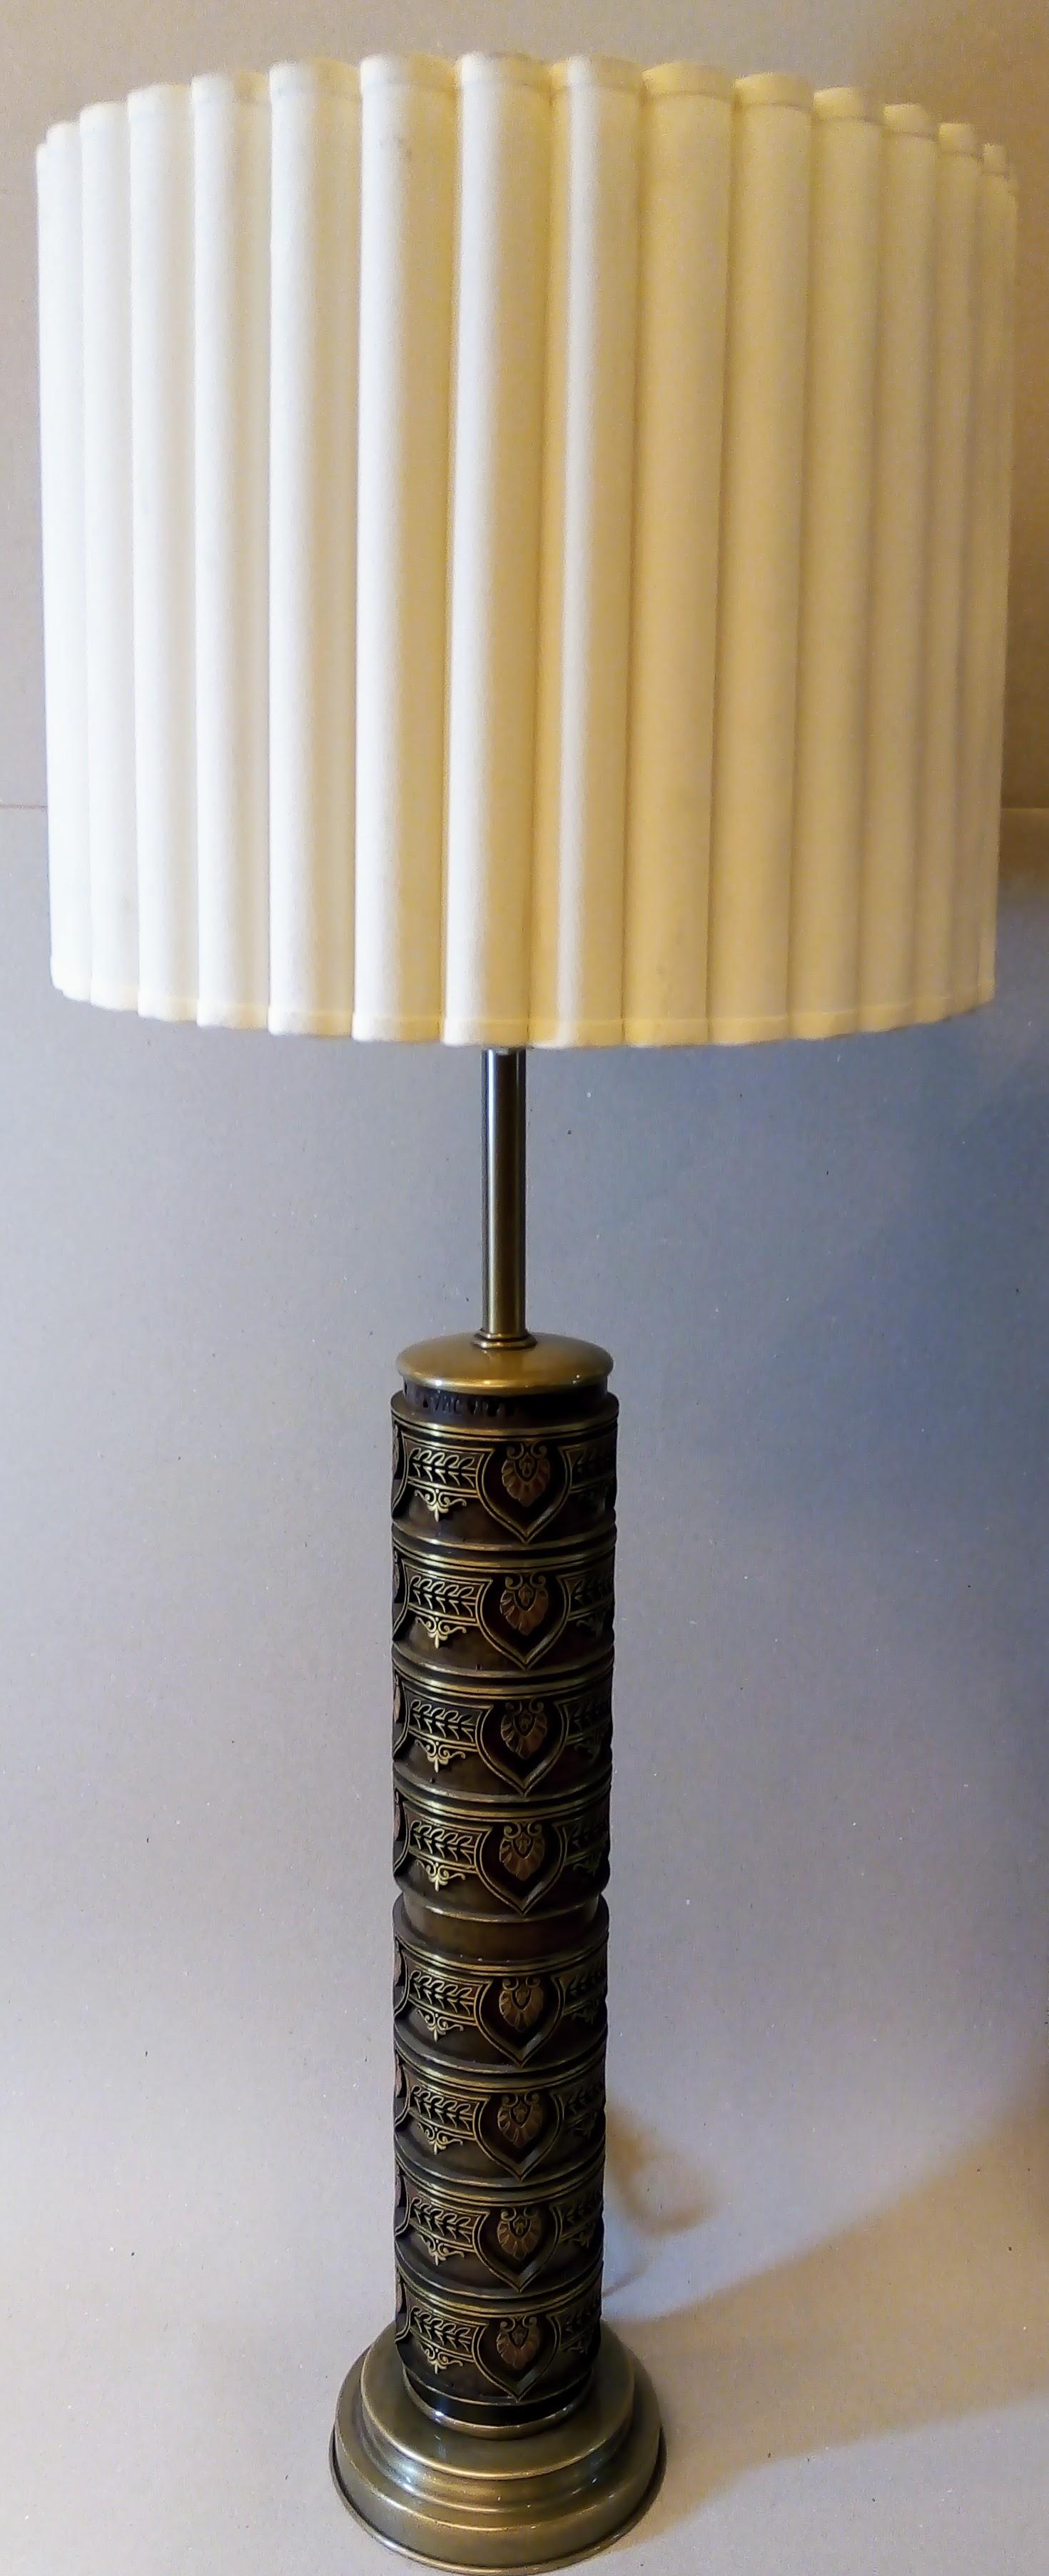 Set of 4 Striking Wallpaper Printing Roller Lamps from the 60's 1